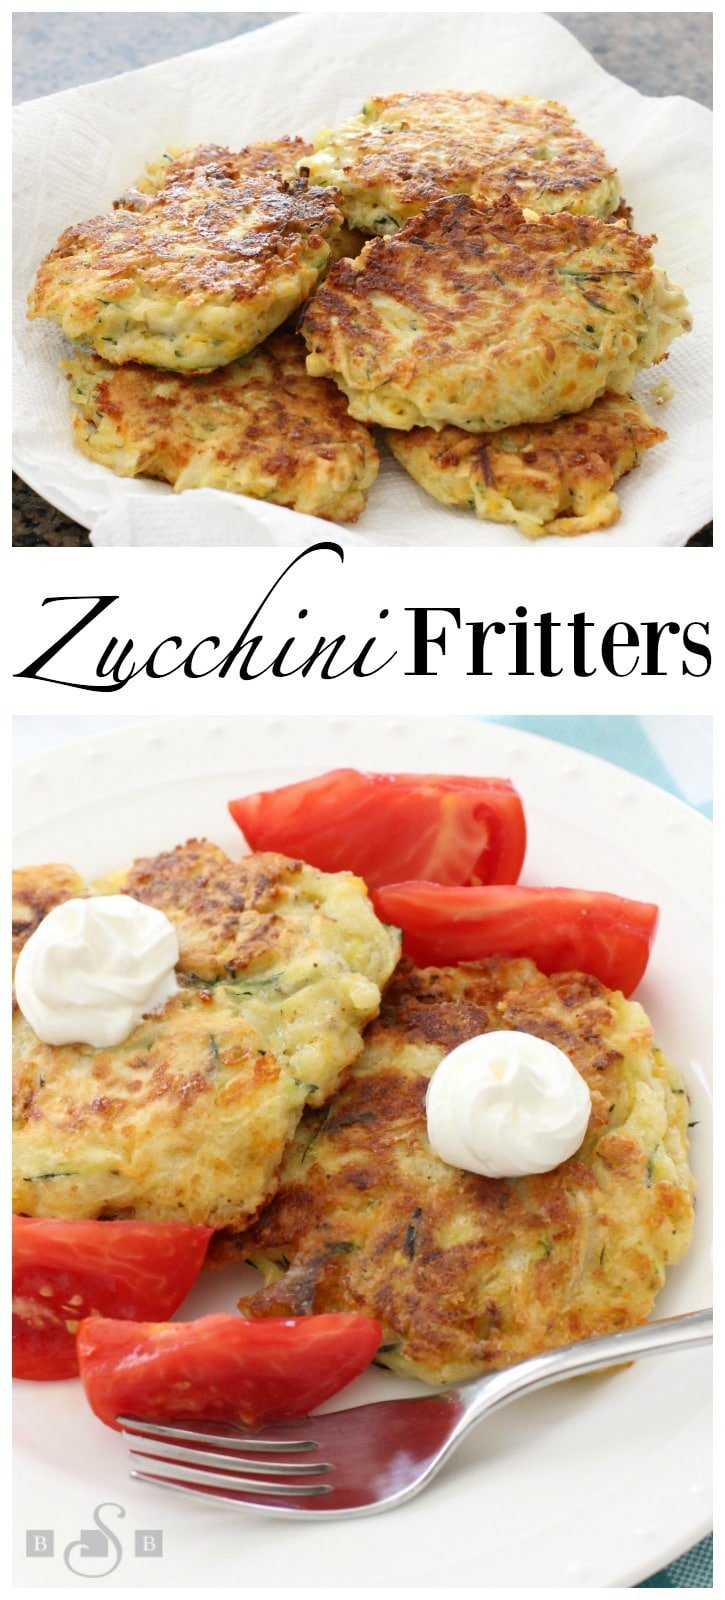 Cheesy Zucchini Fritters are the perfect way to use up some zucchini from your garden! Great as a side dish or appetizer, they're easy to make & flavorful! Easy #zucchini #recipe from Butter With A Side of Bread